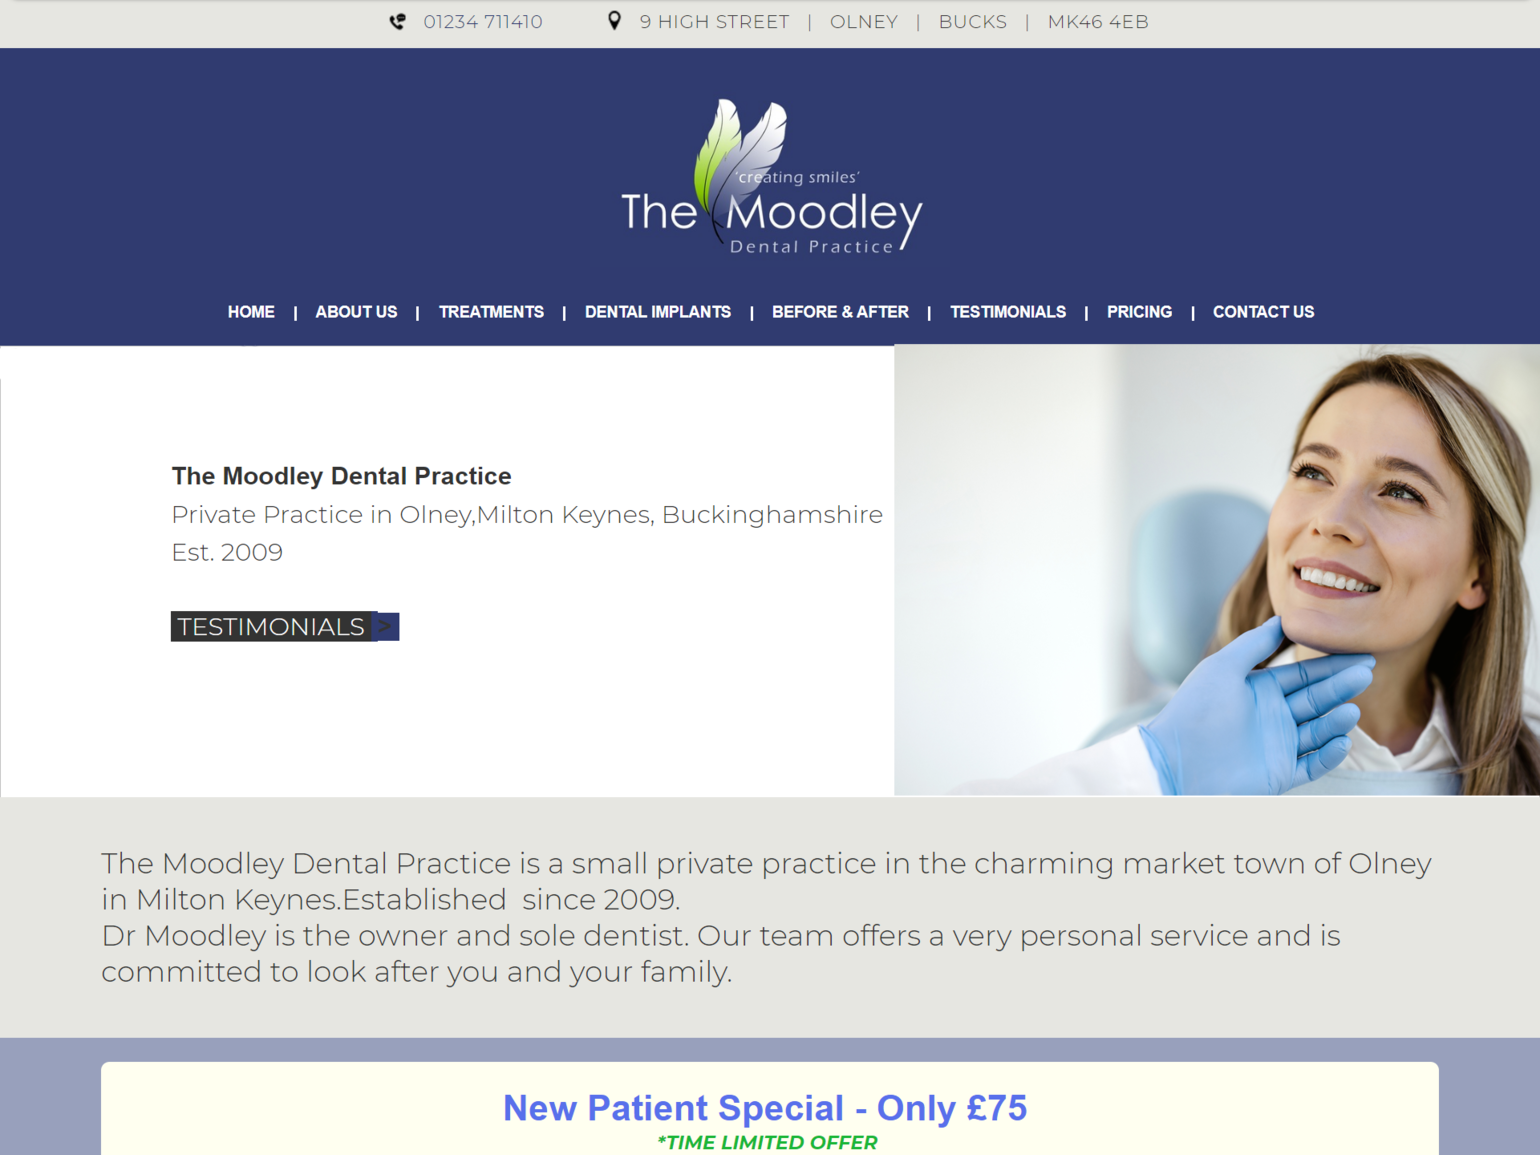 The previous website belonging to The Moodley Dental Practice